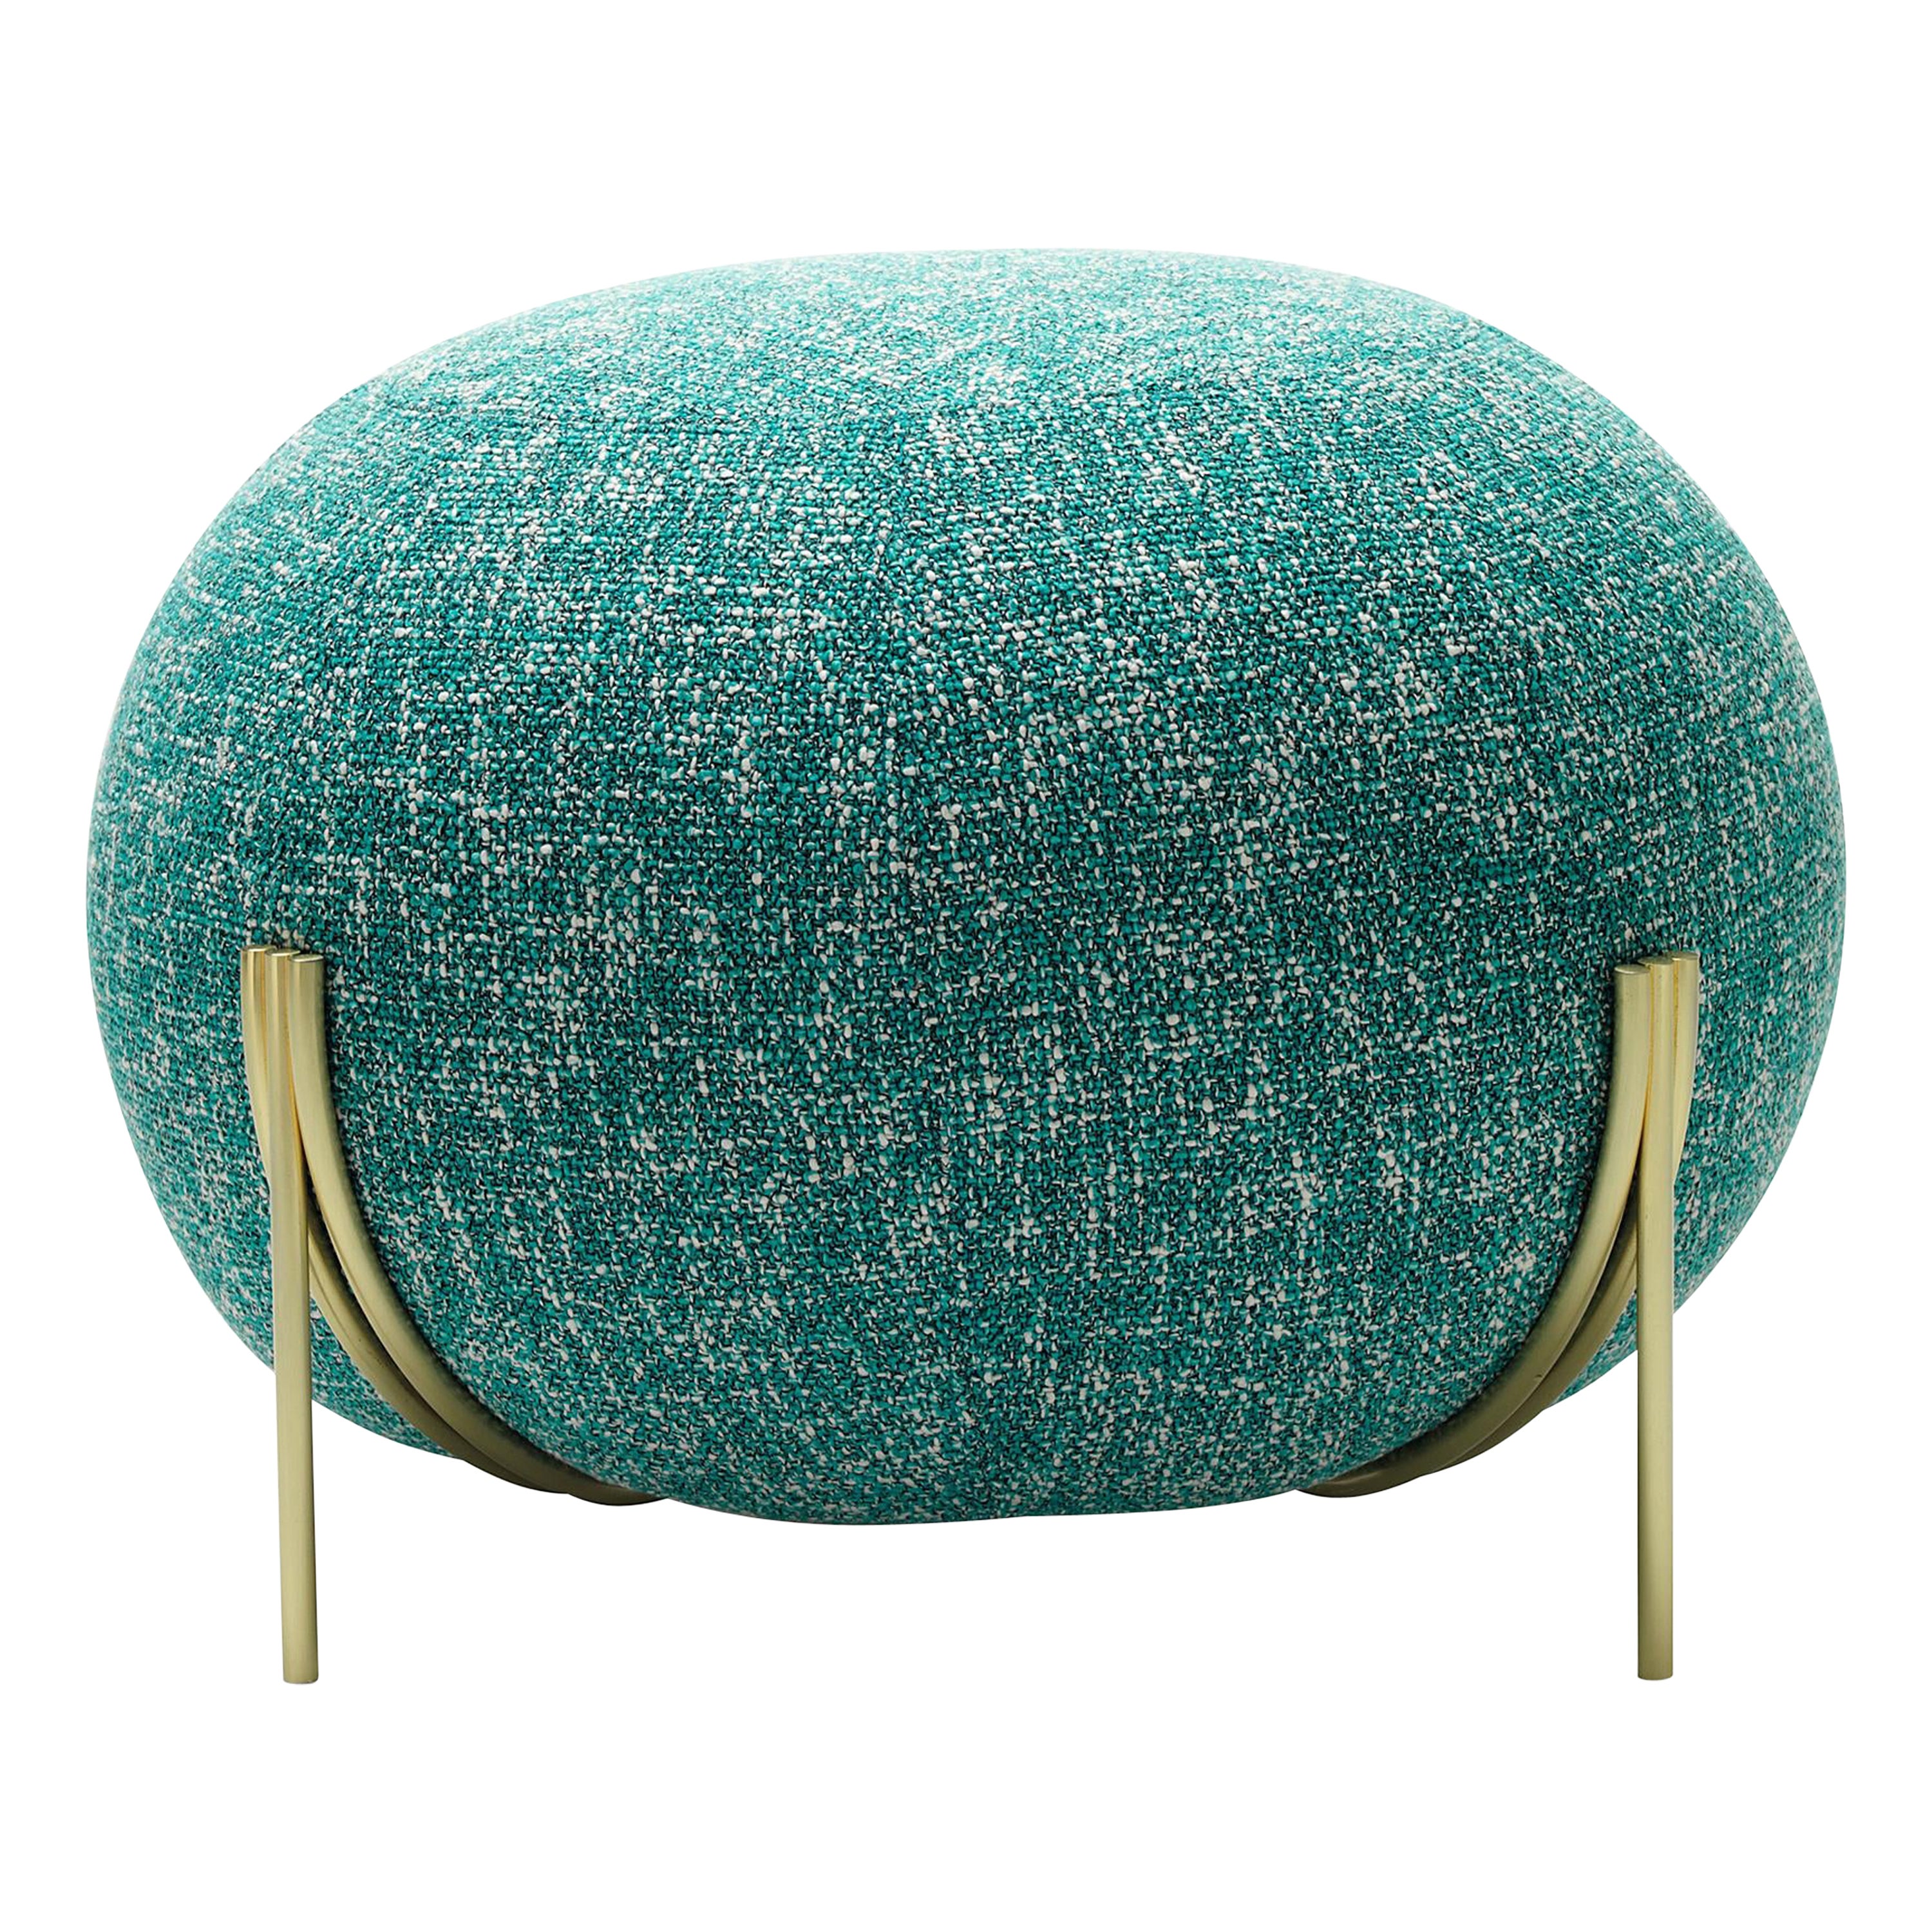 Geo Small Pouf in Seventy Blue Upholstery & Satin Brass Legs by Paolo Grasselli For Sale